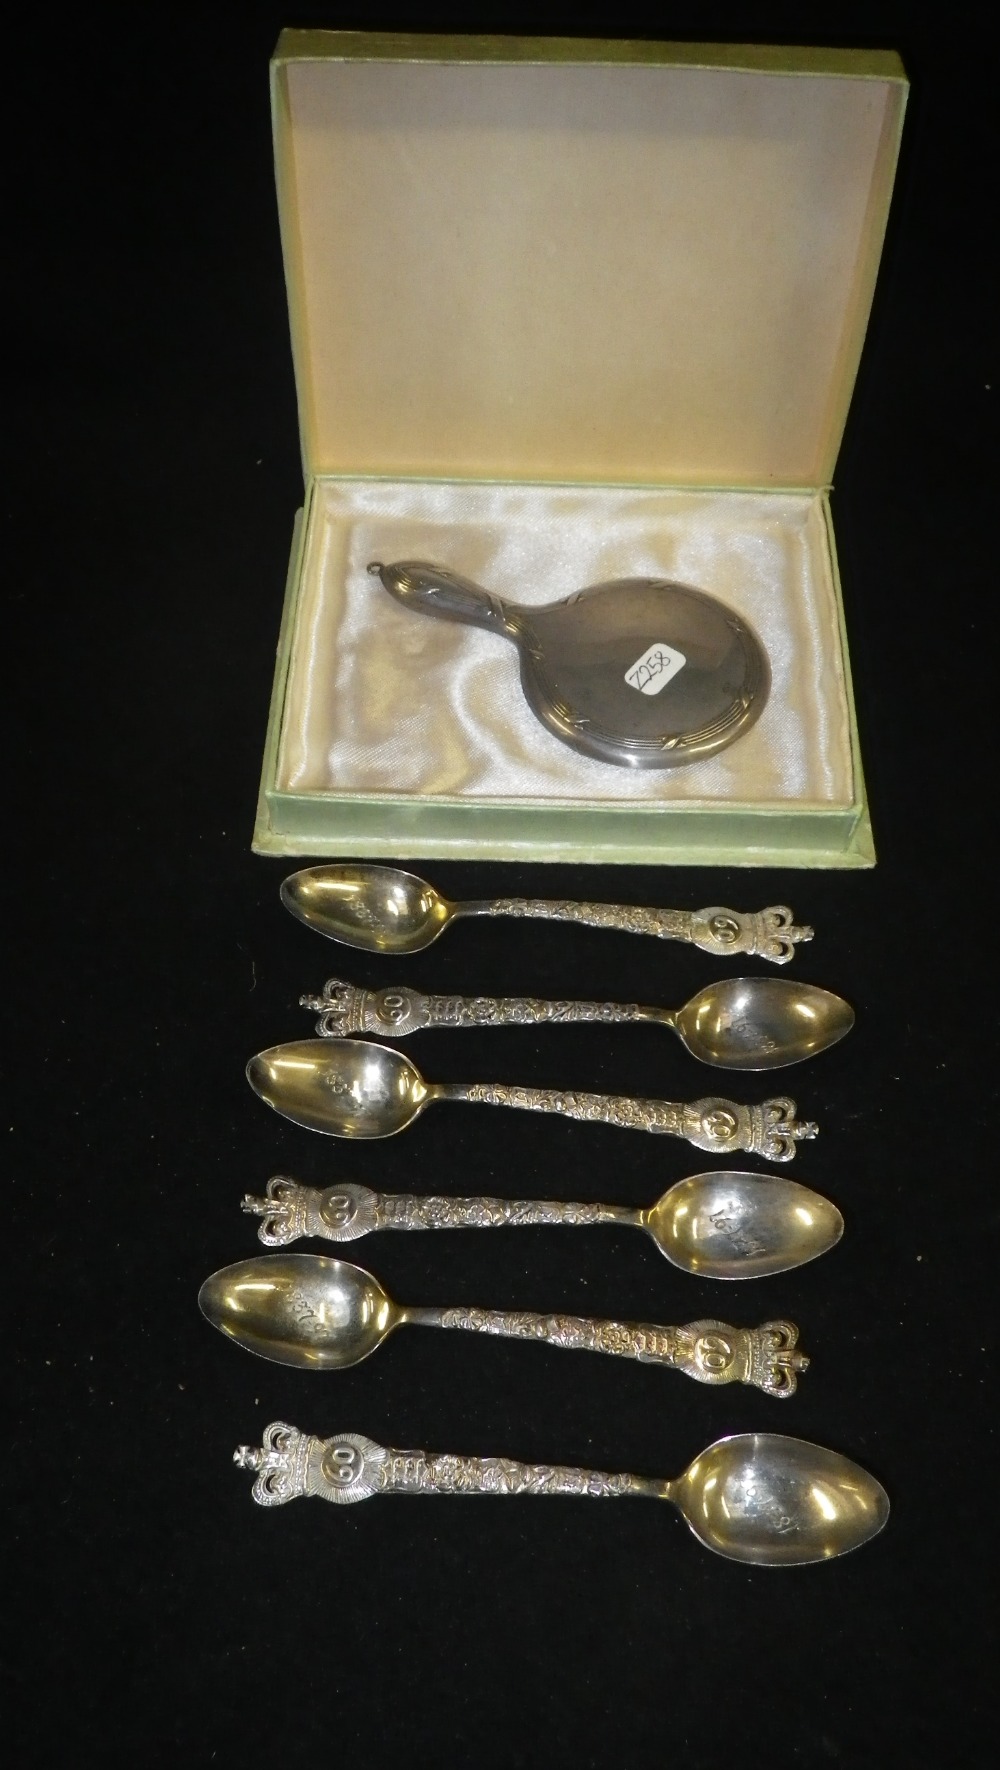 A cased set of six Victorian Jubilee teaspoons and a miniature silver-backed mirror